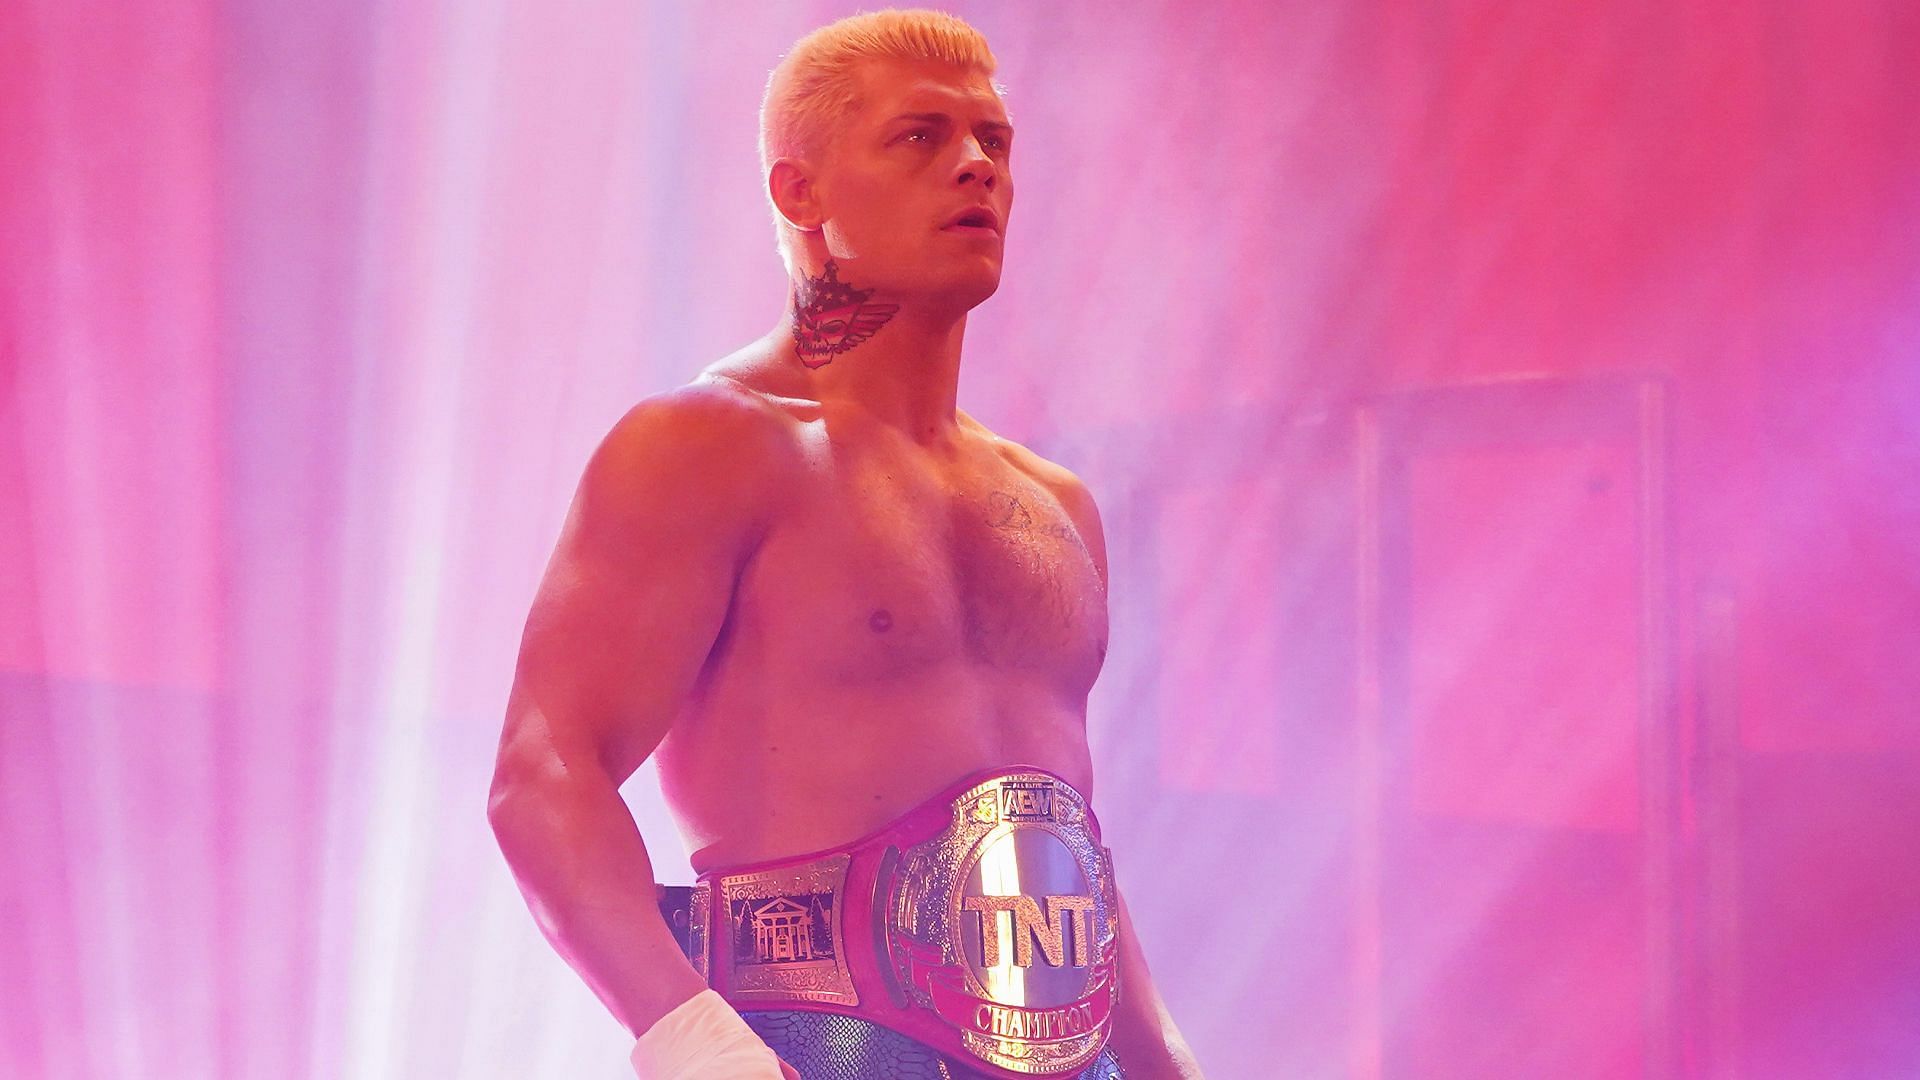 Cody Rhodes makes his entrance as TNT Champion